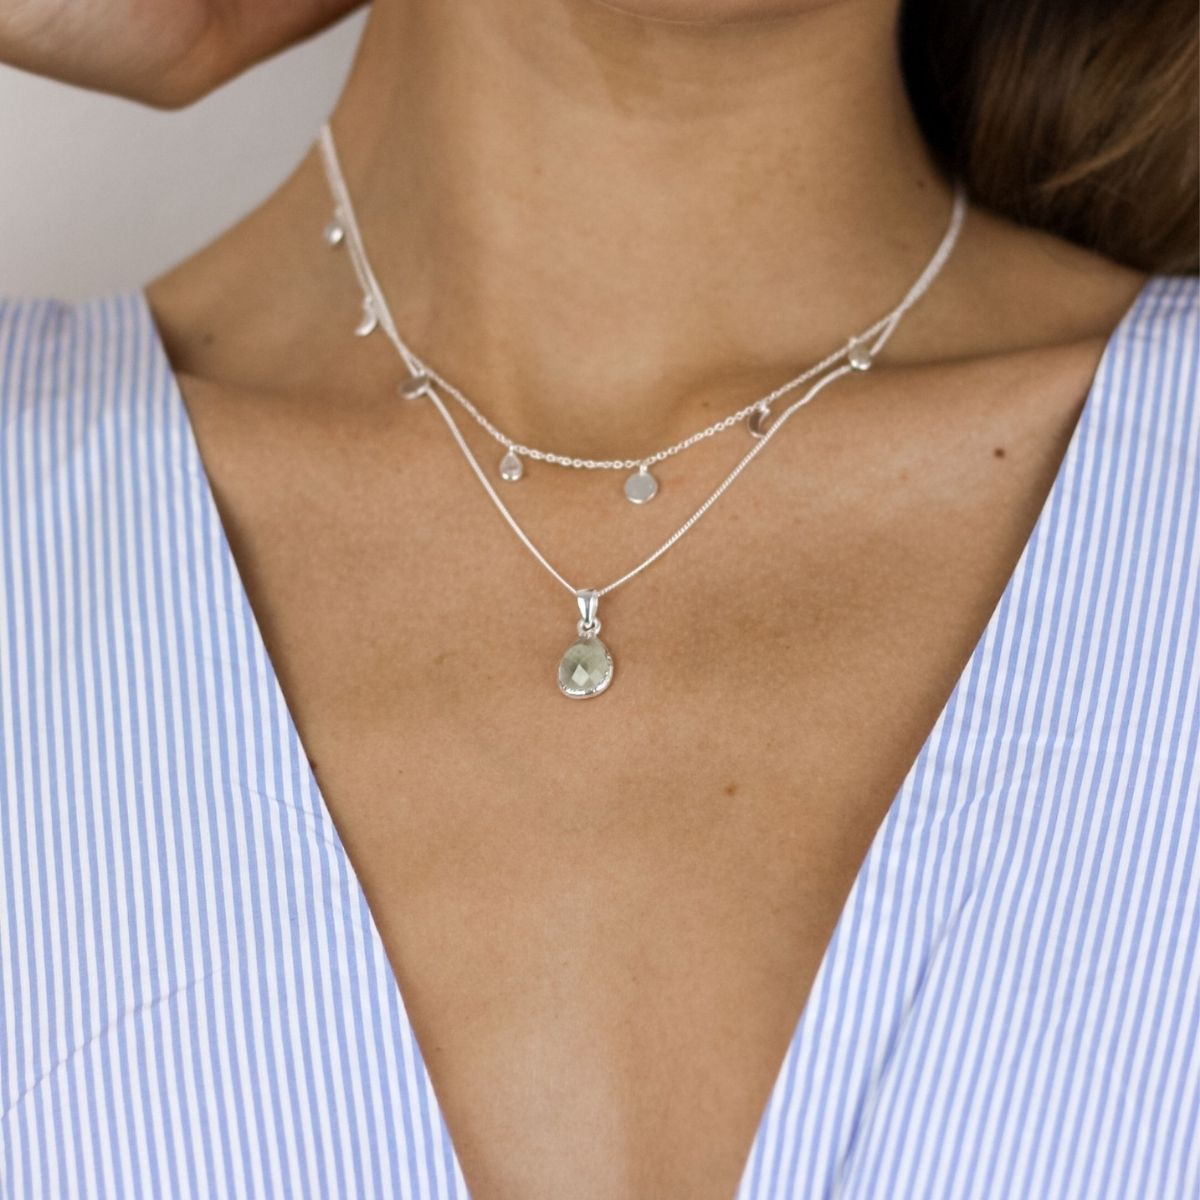 a woman wearing to necklaces around her neck